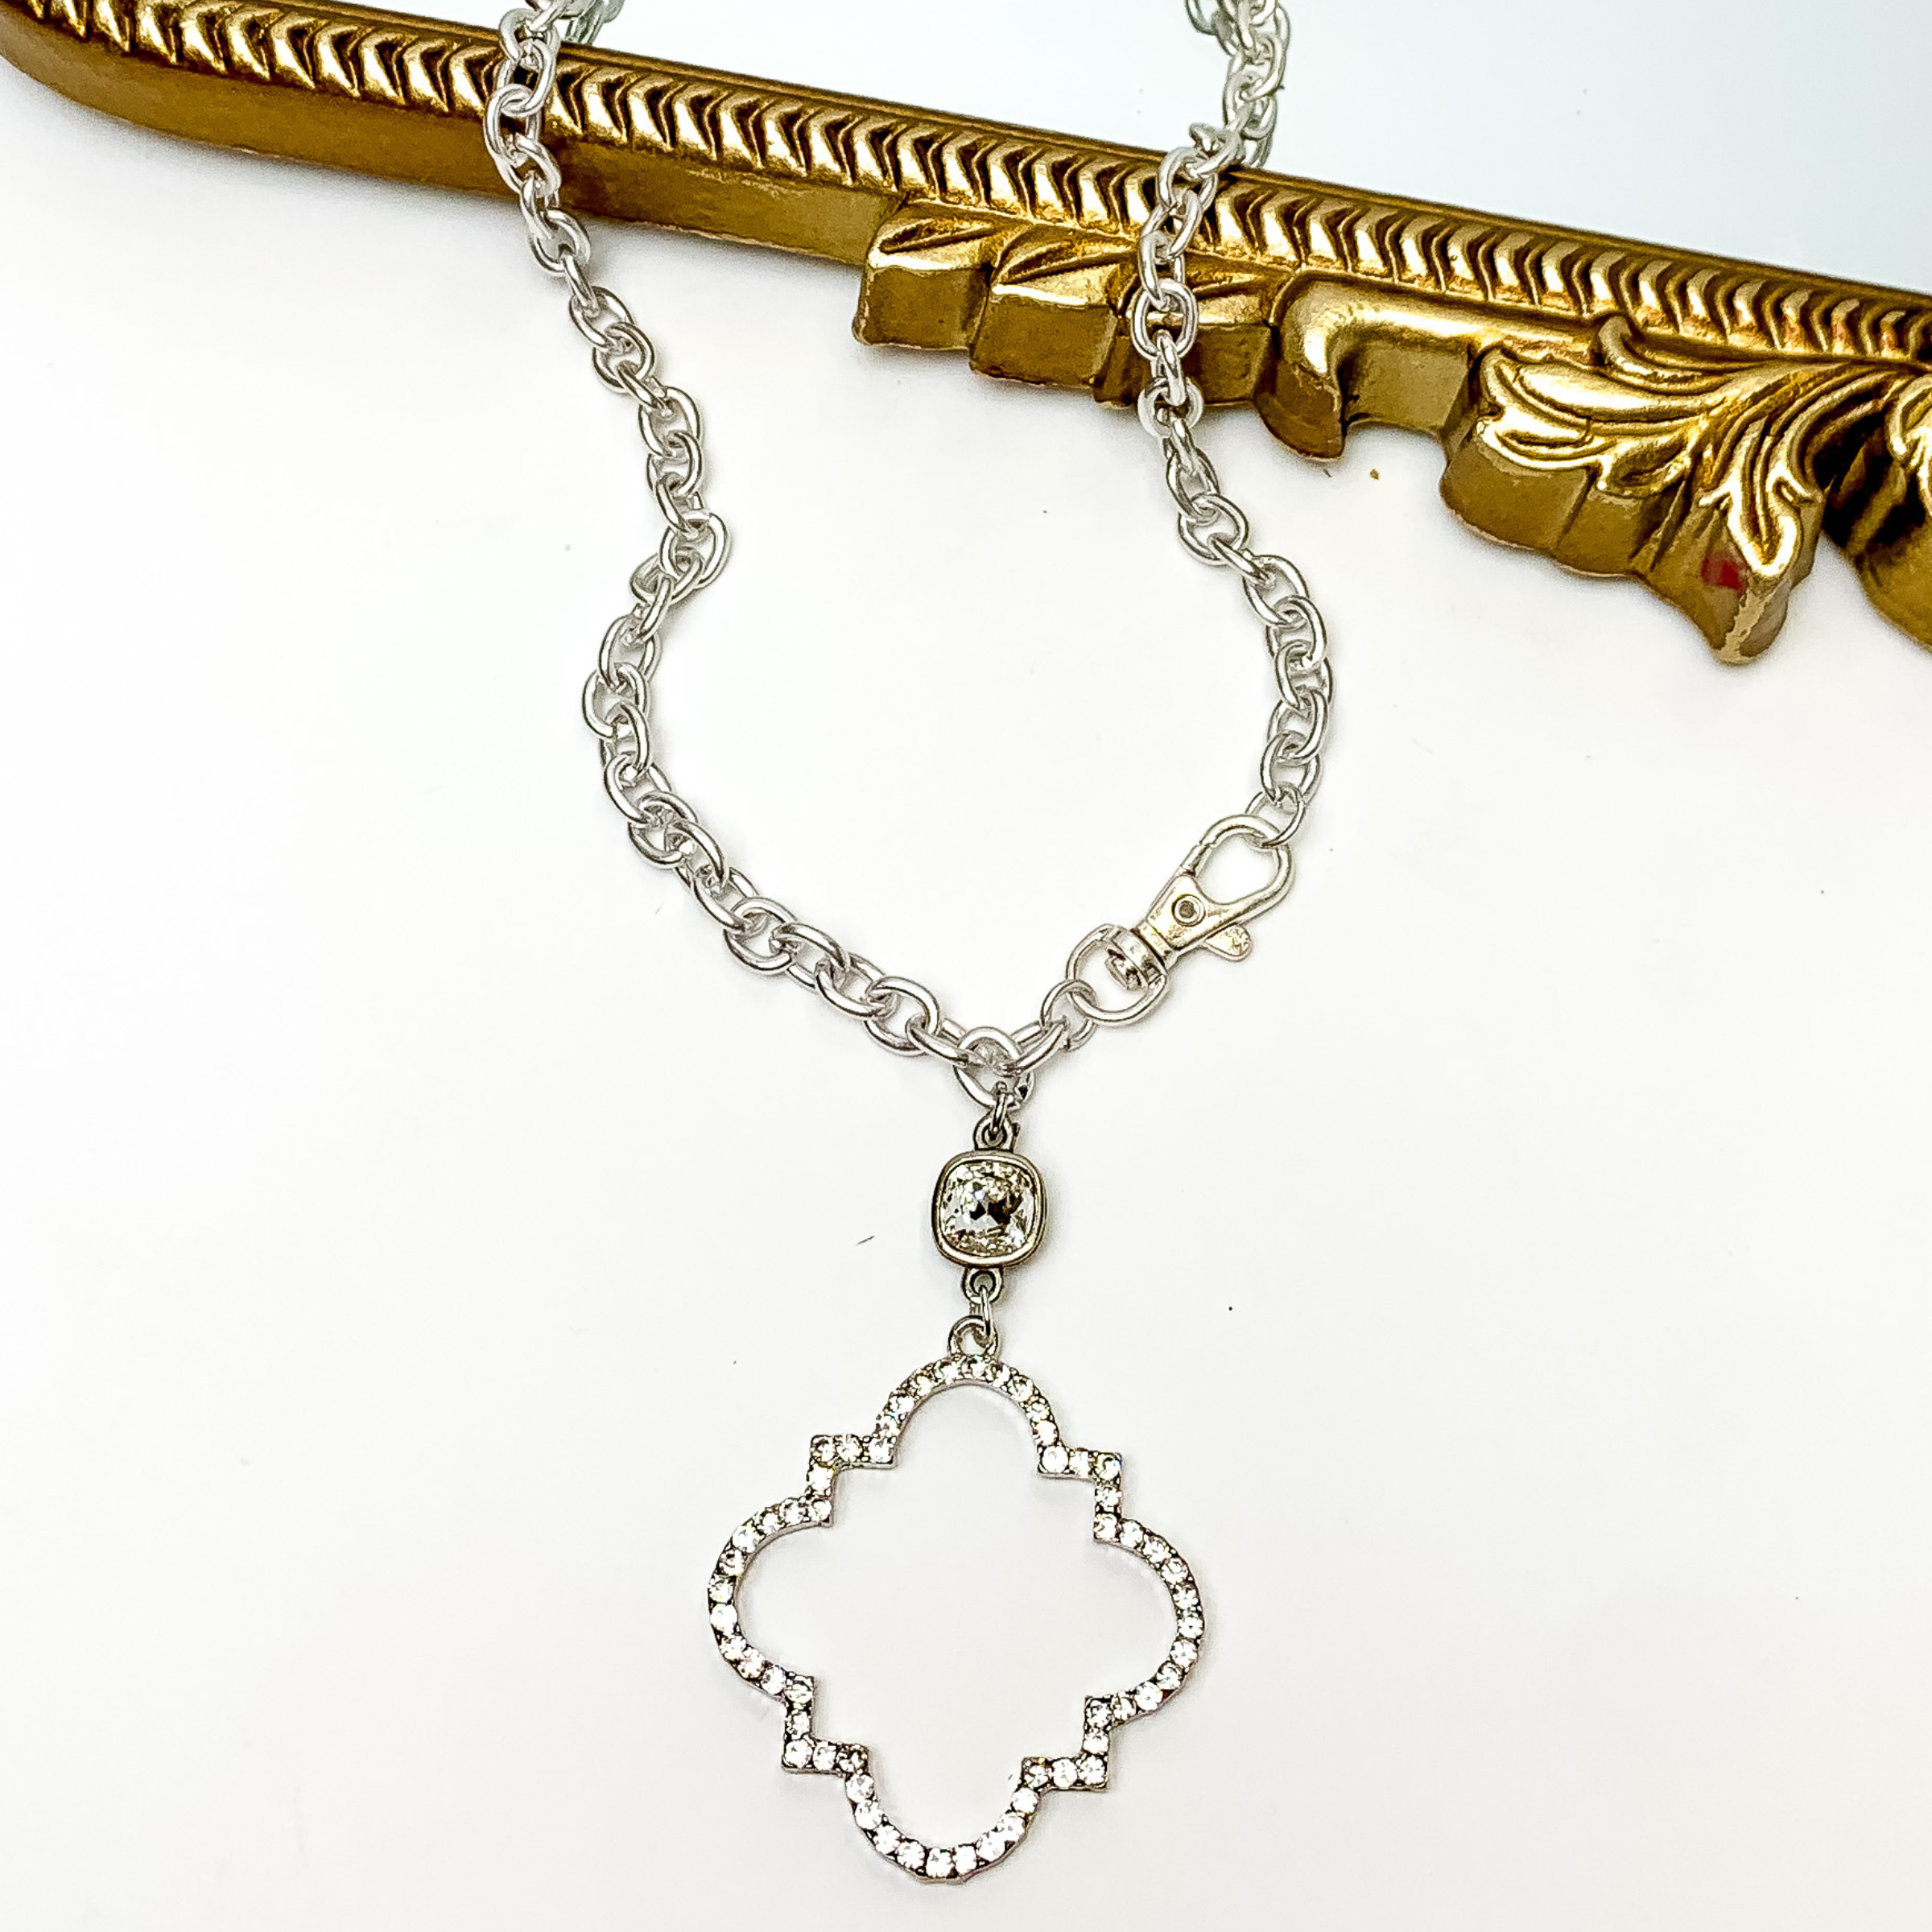 Chain necklace with a clear cushion cut crystal and quatrefoil drop in silver. The quatrefoil has a clear crystal inlay. This necklace is pictured patially laying on a gold mirror and on a white background. 